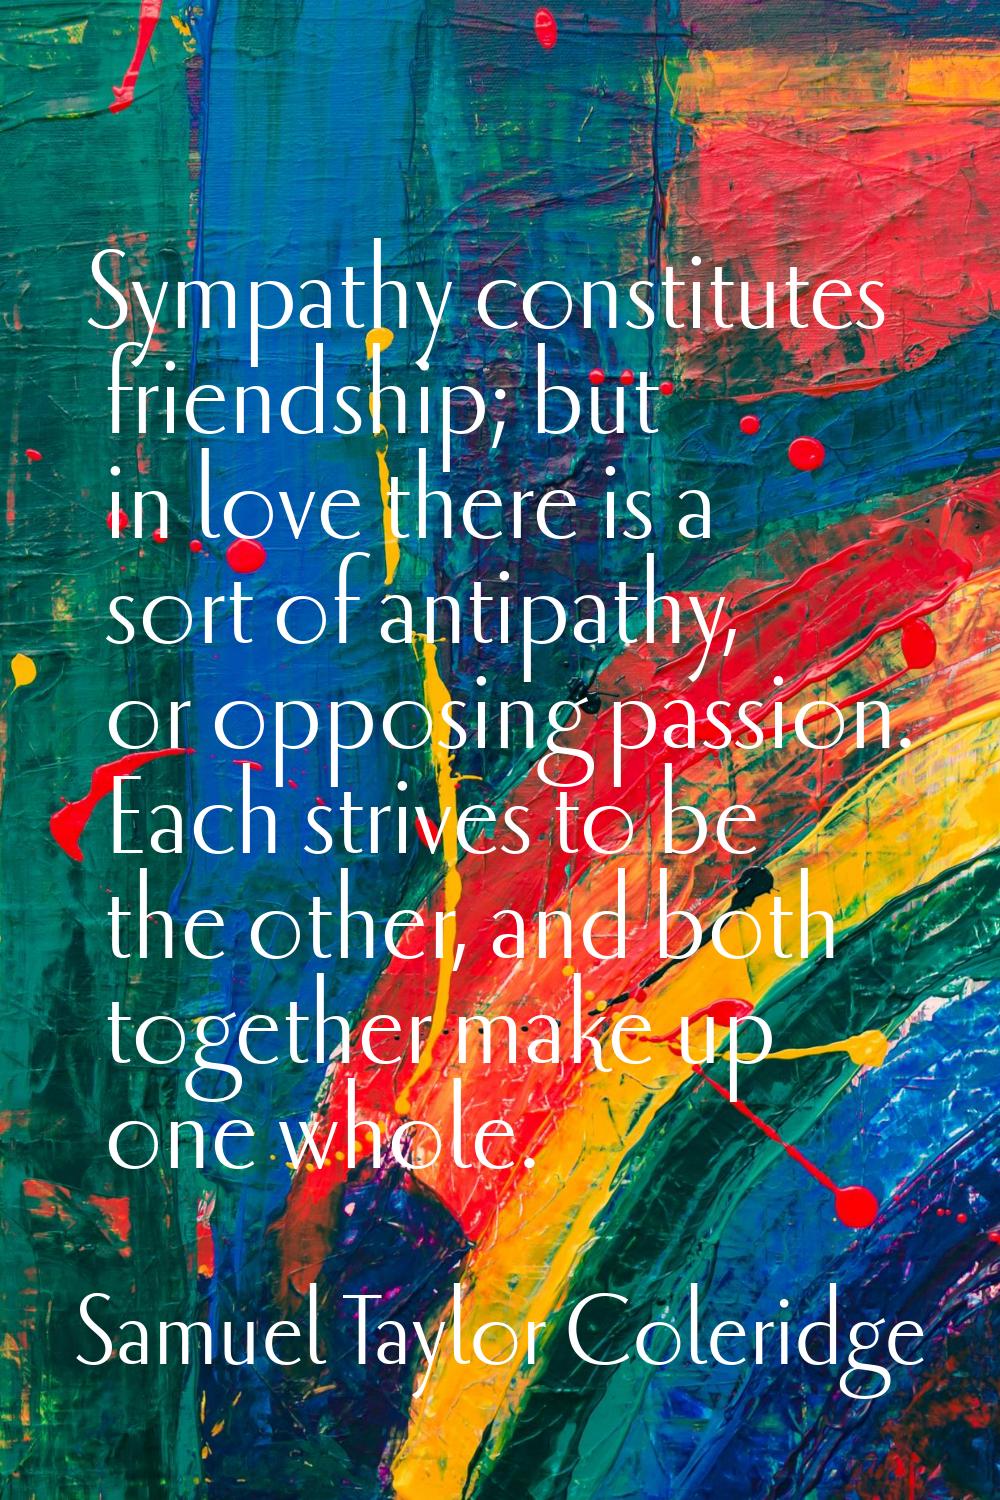 Sympathy constitutes friendship; but in love there is a sort of antipathy, or opposing passion. Eac